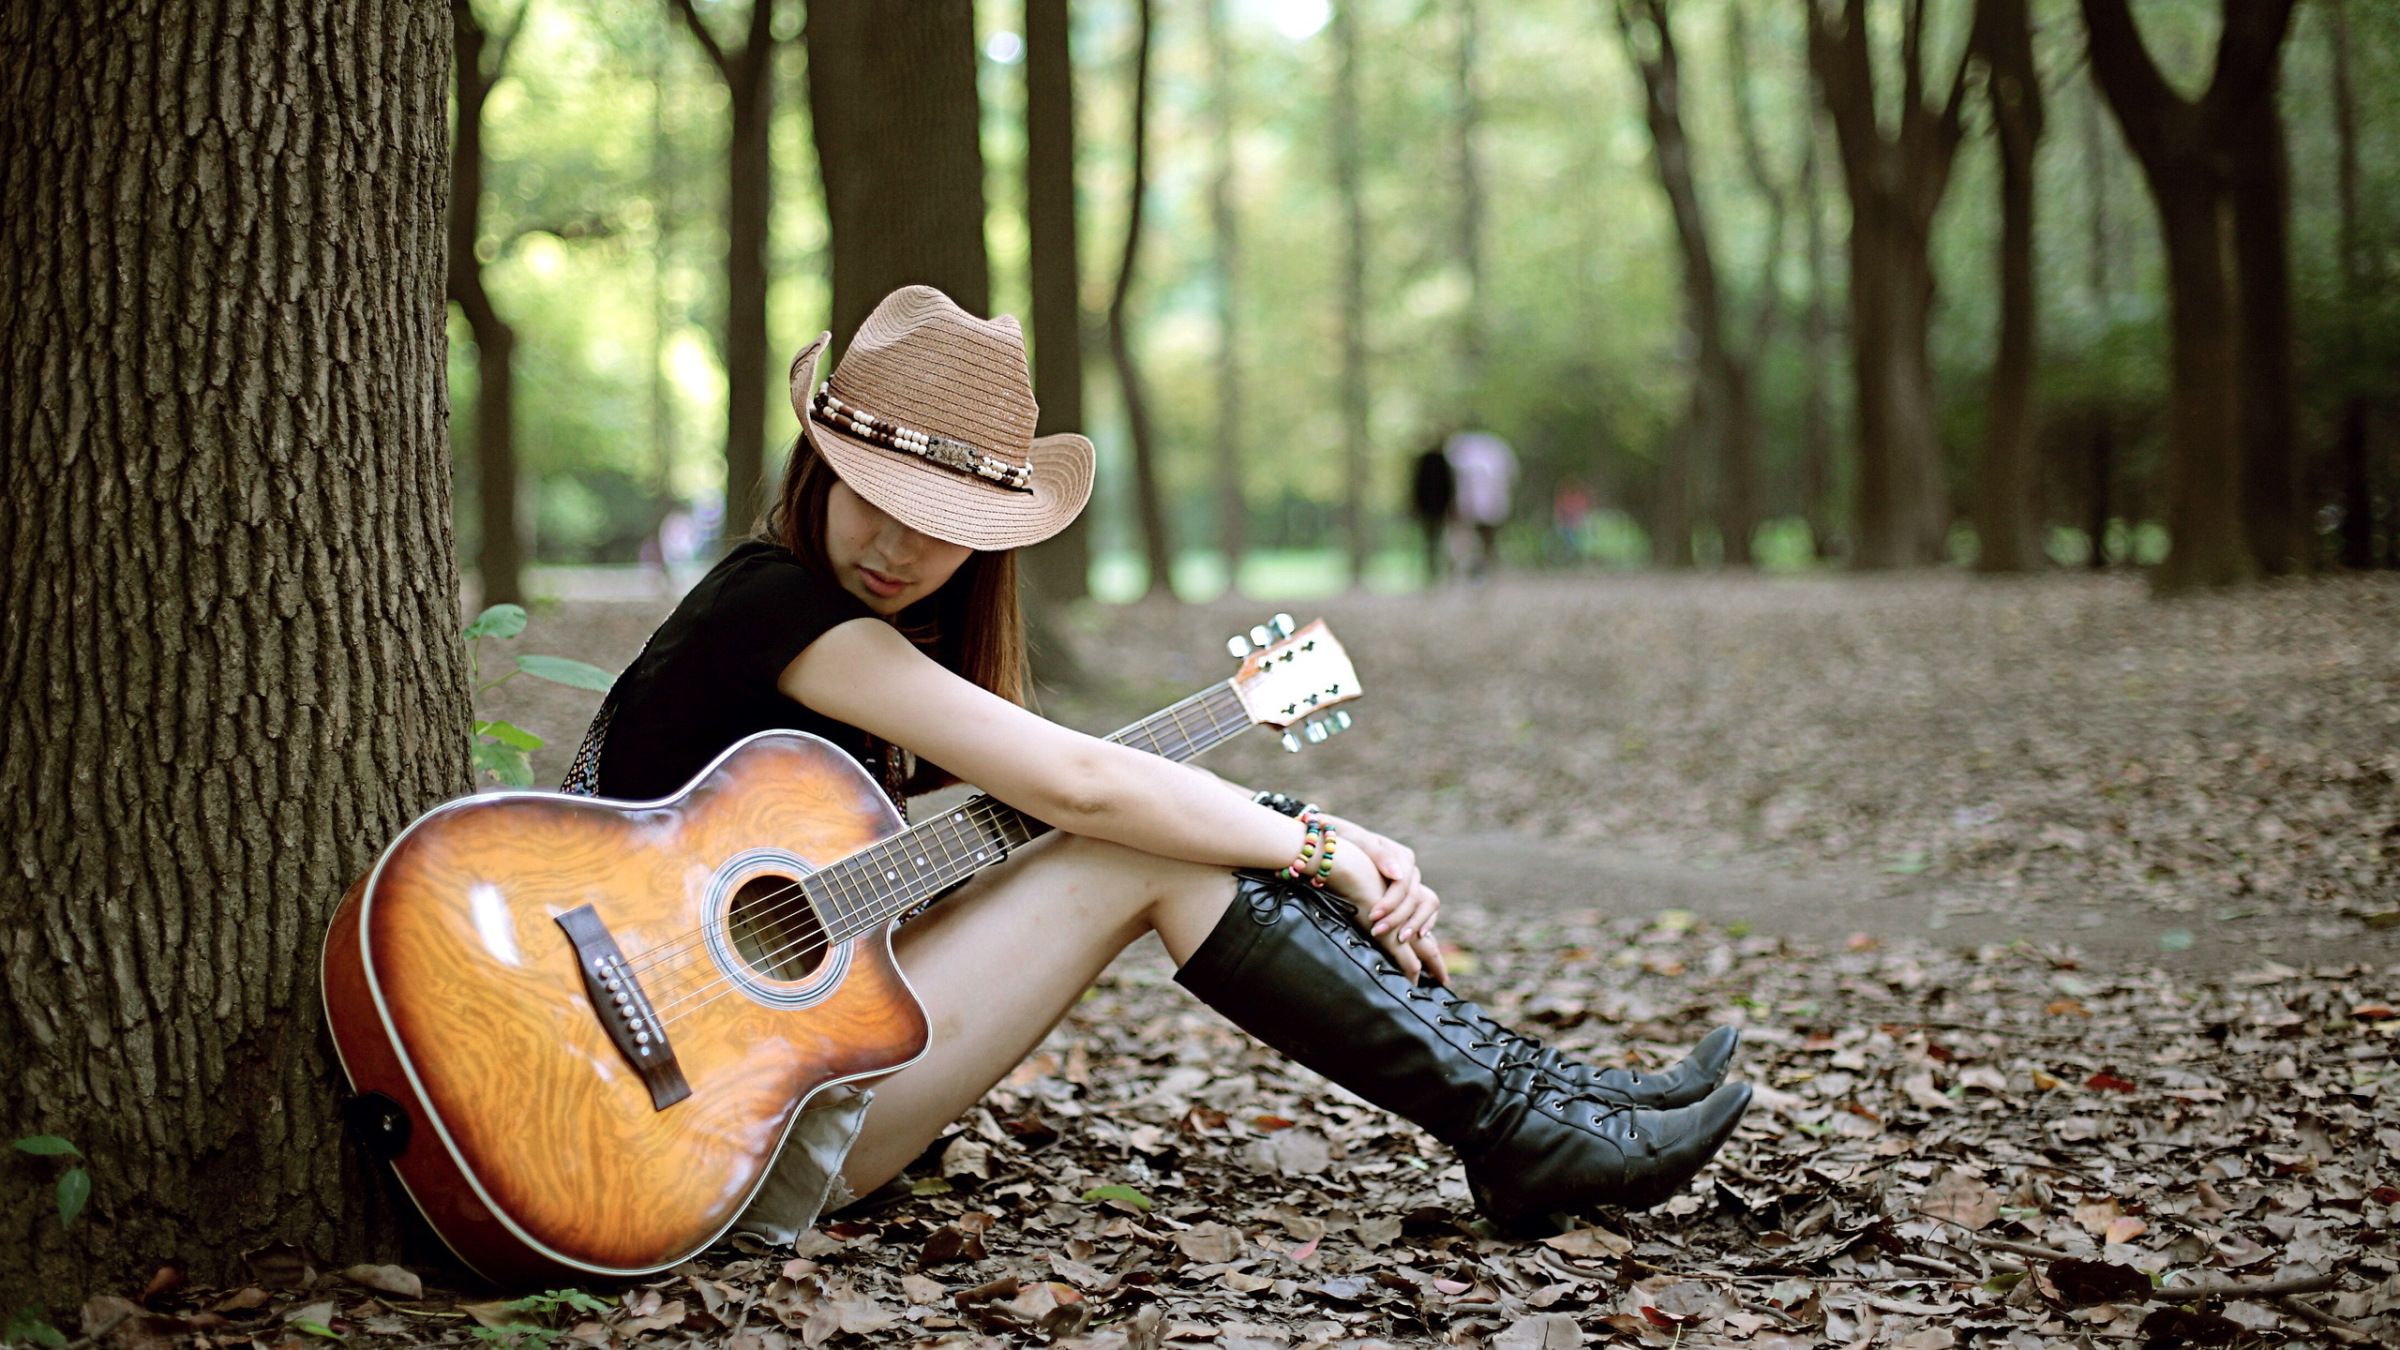 Cool Guitars Wallpapers For Girls